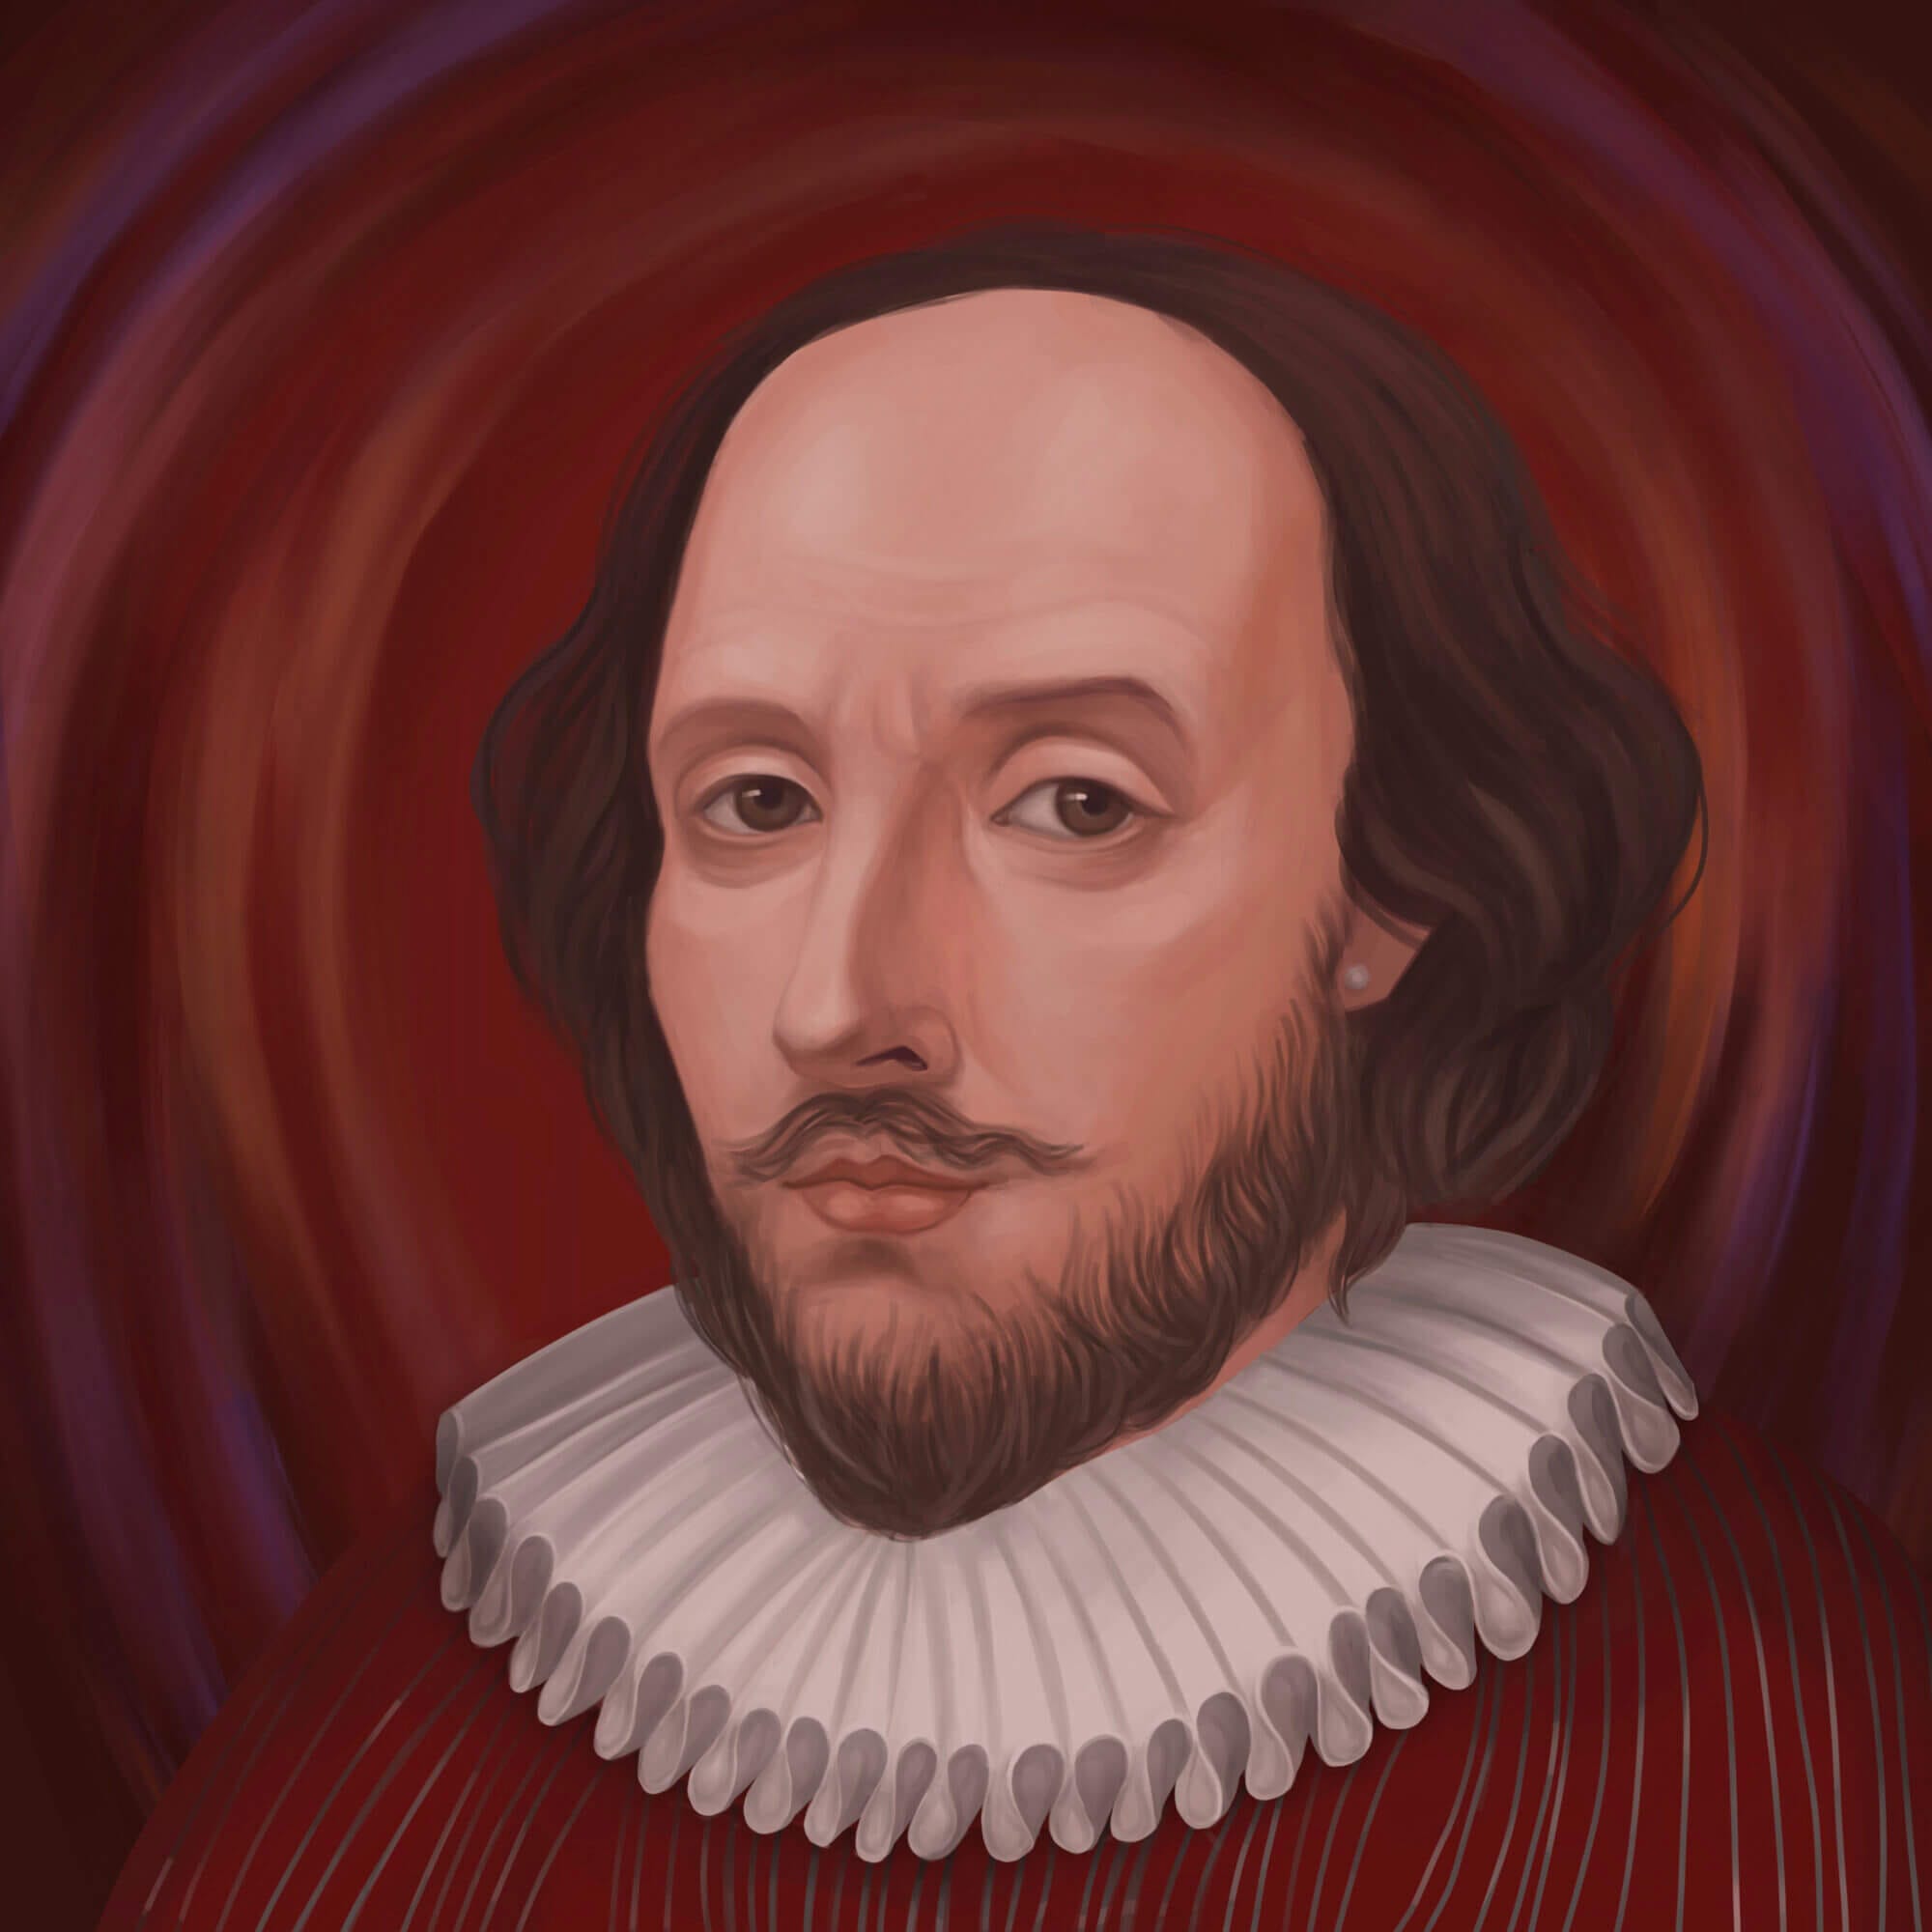 150+ William Shakespeare Poems, Ranked by Poetry Experts - Poem